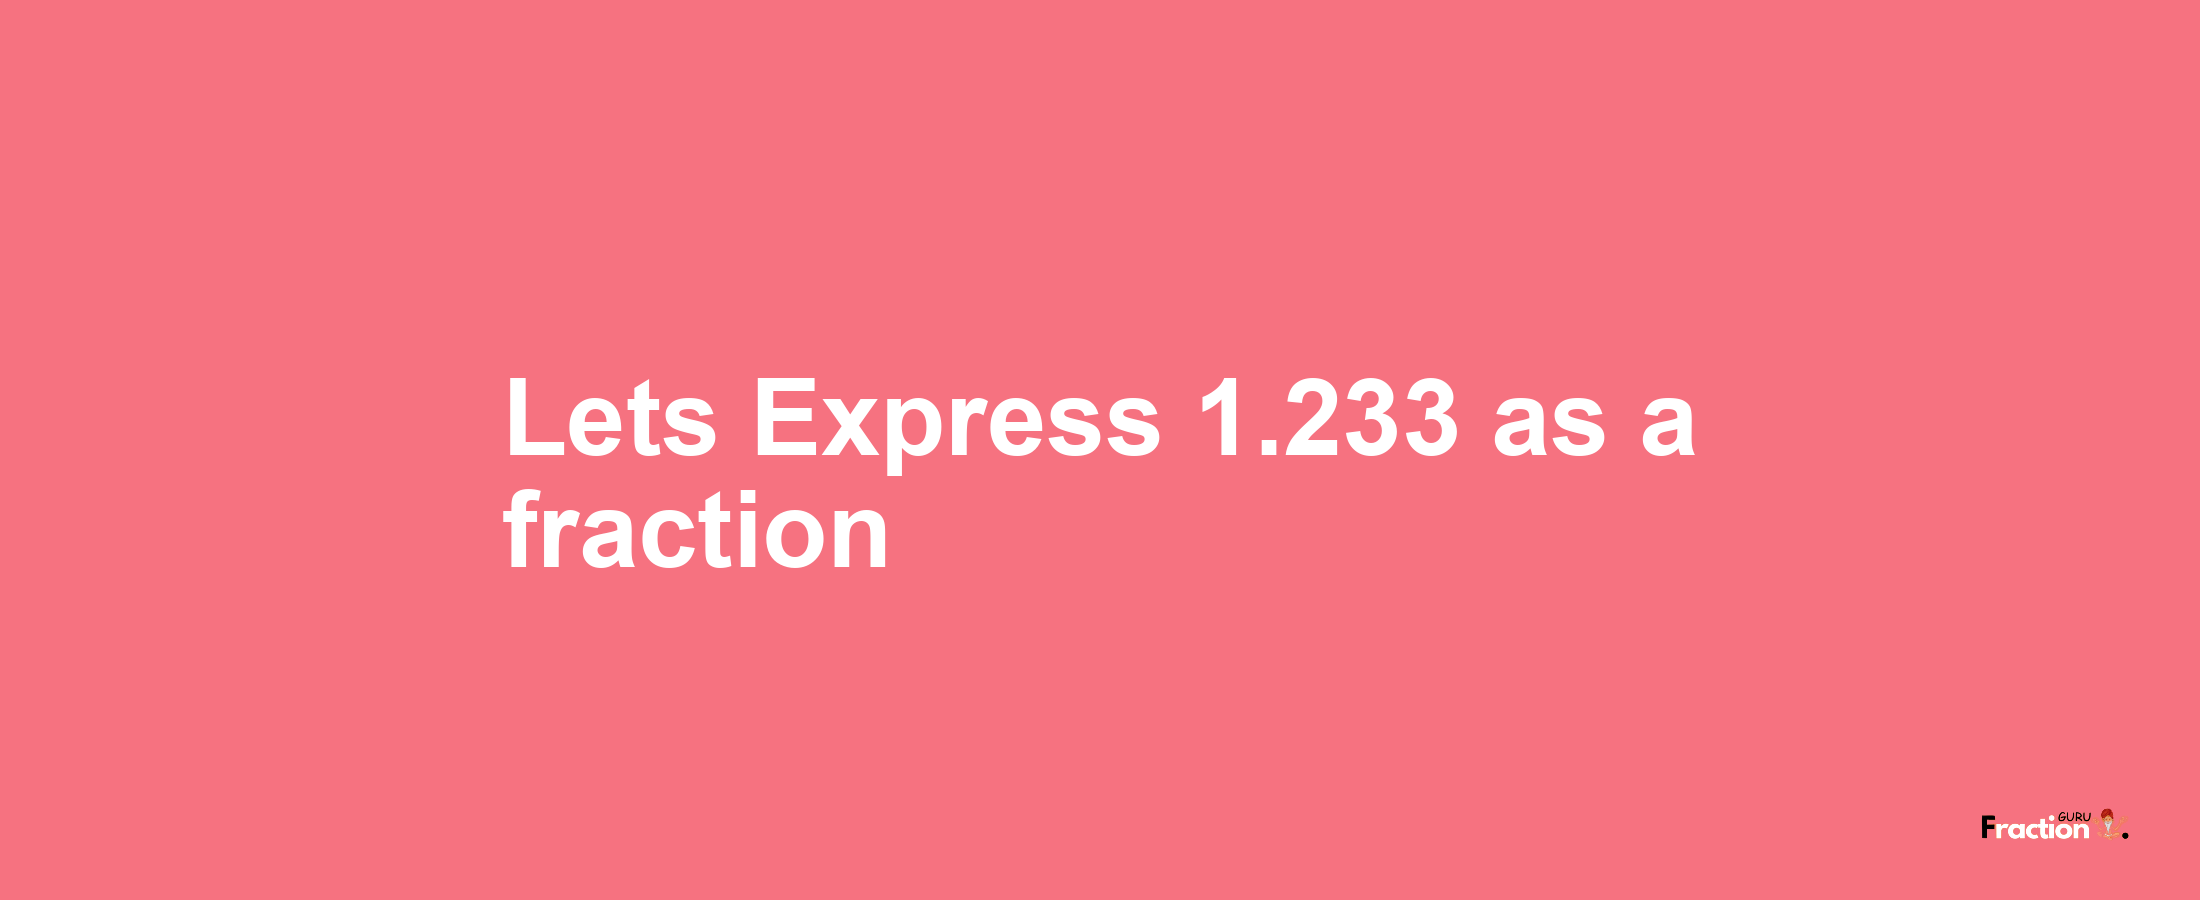 Lets Express 1.233 as afraction